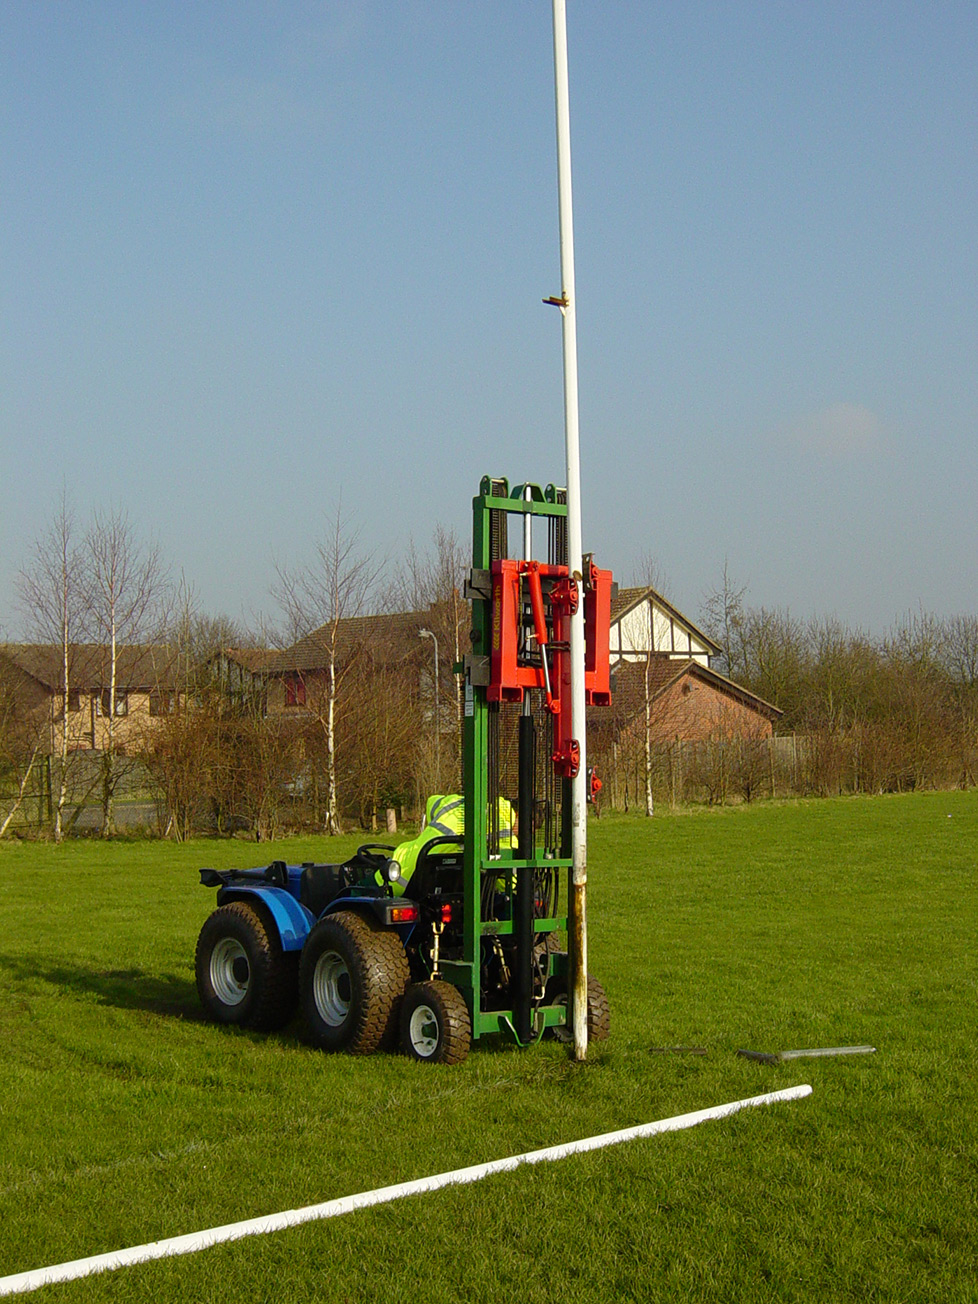 Sfk Hydraulic Forklifts And Goal Post Lifter Kilworth